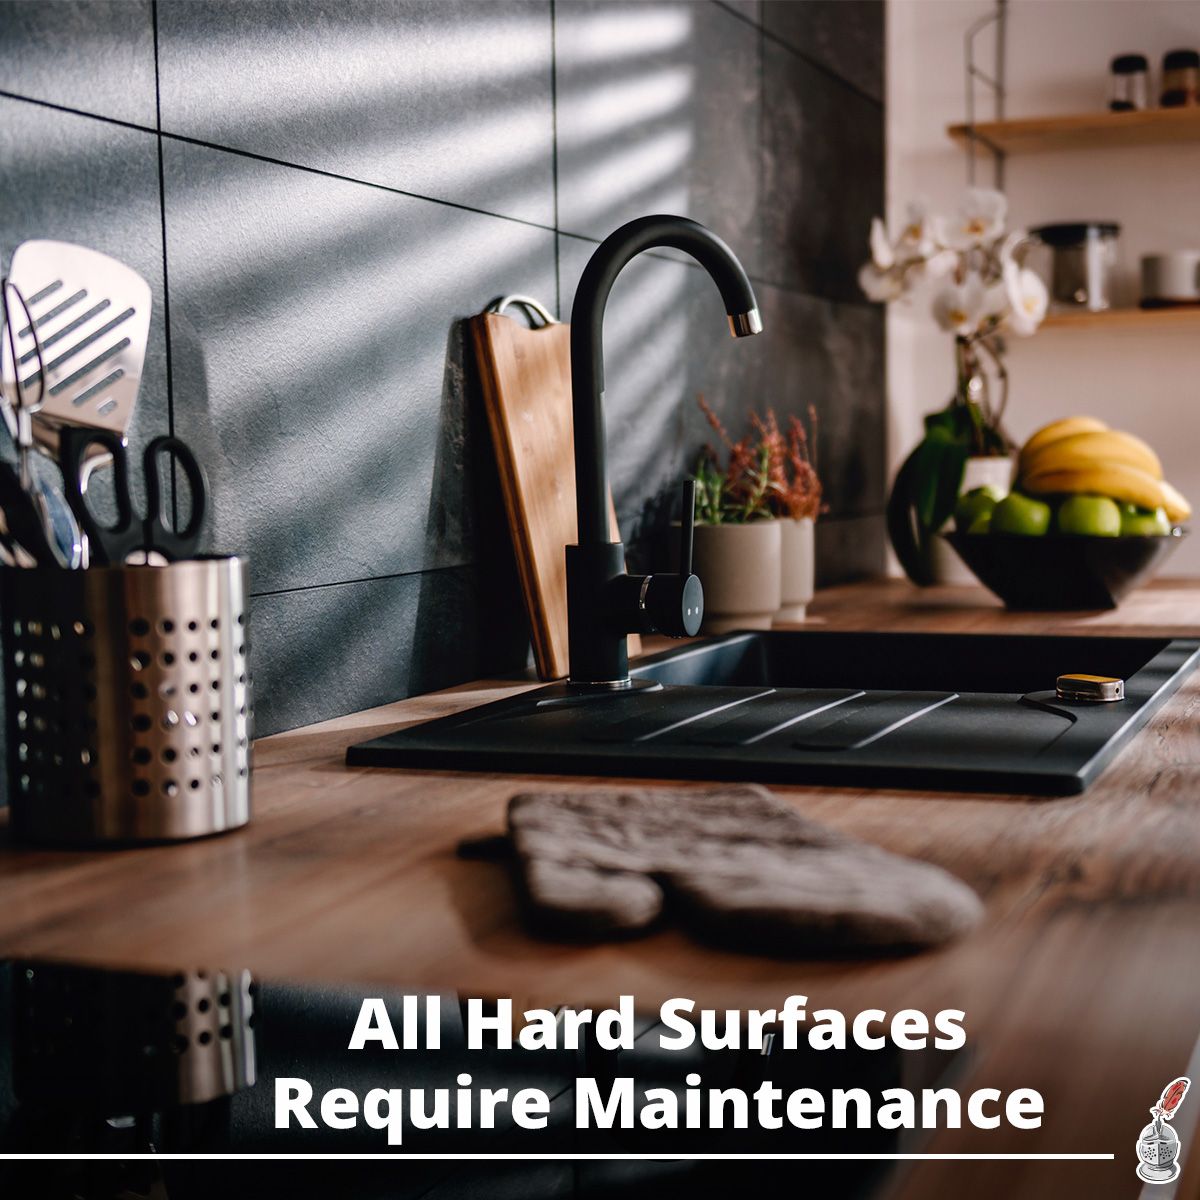 All Hard Surfaces Require Maintenance